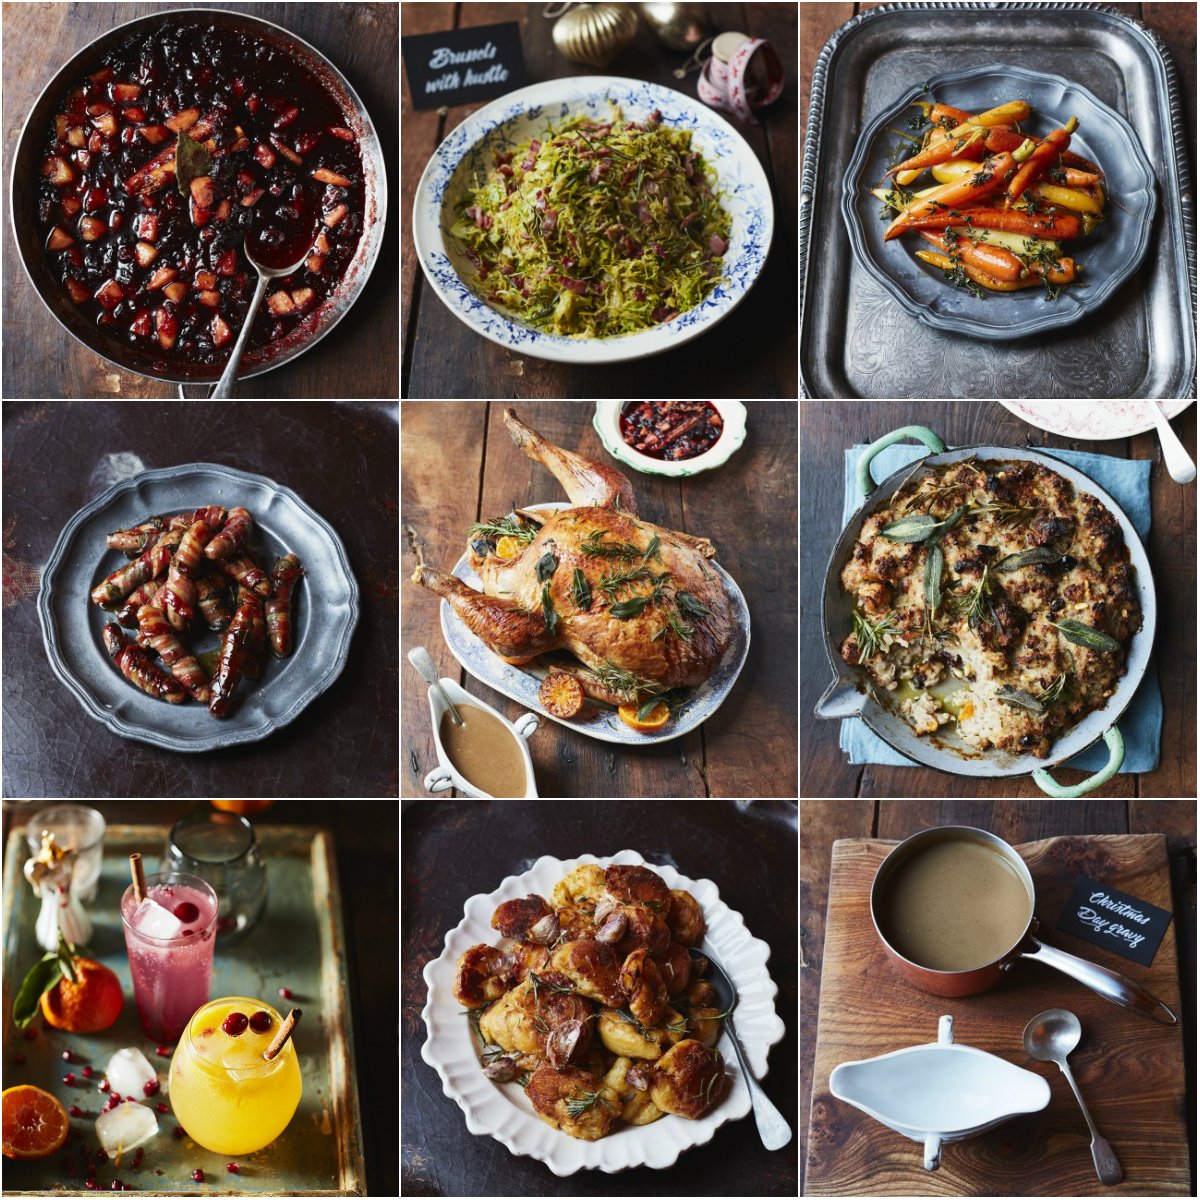 all the recipes and tips over on my website. Merry Christmas everyone xxx JO https://t.co/FRAds7MBiE https://t.co/5b6tSmwjww